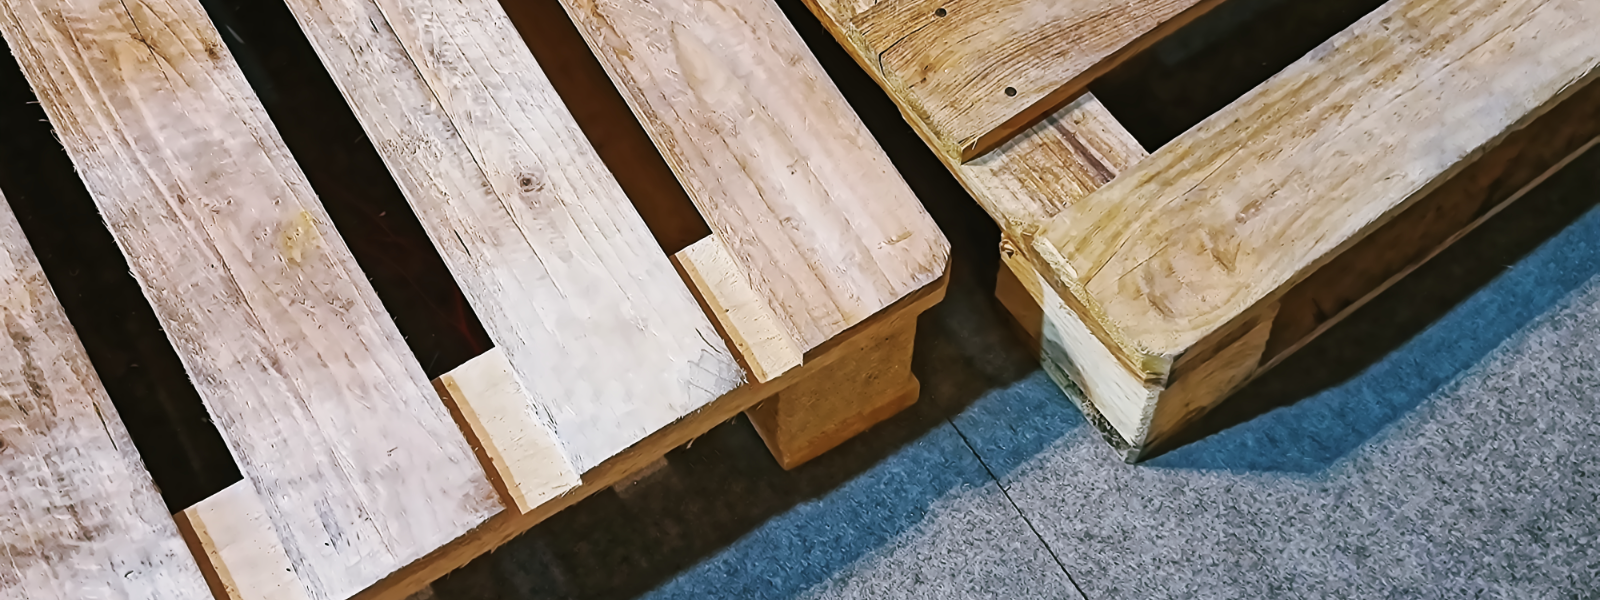 Manufacture of wooden containers and pallets in Kambja vald